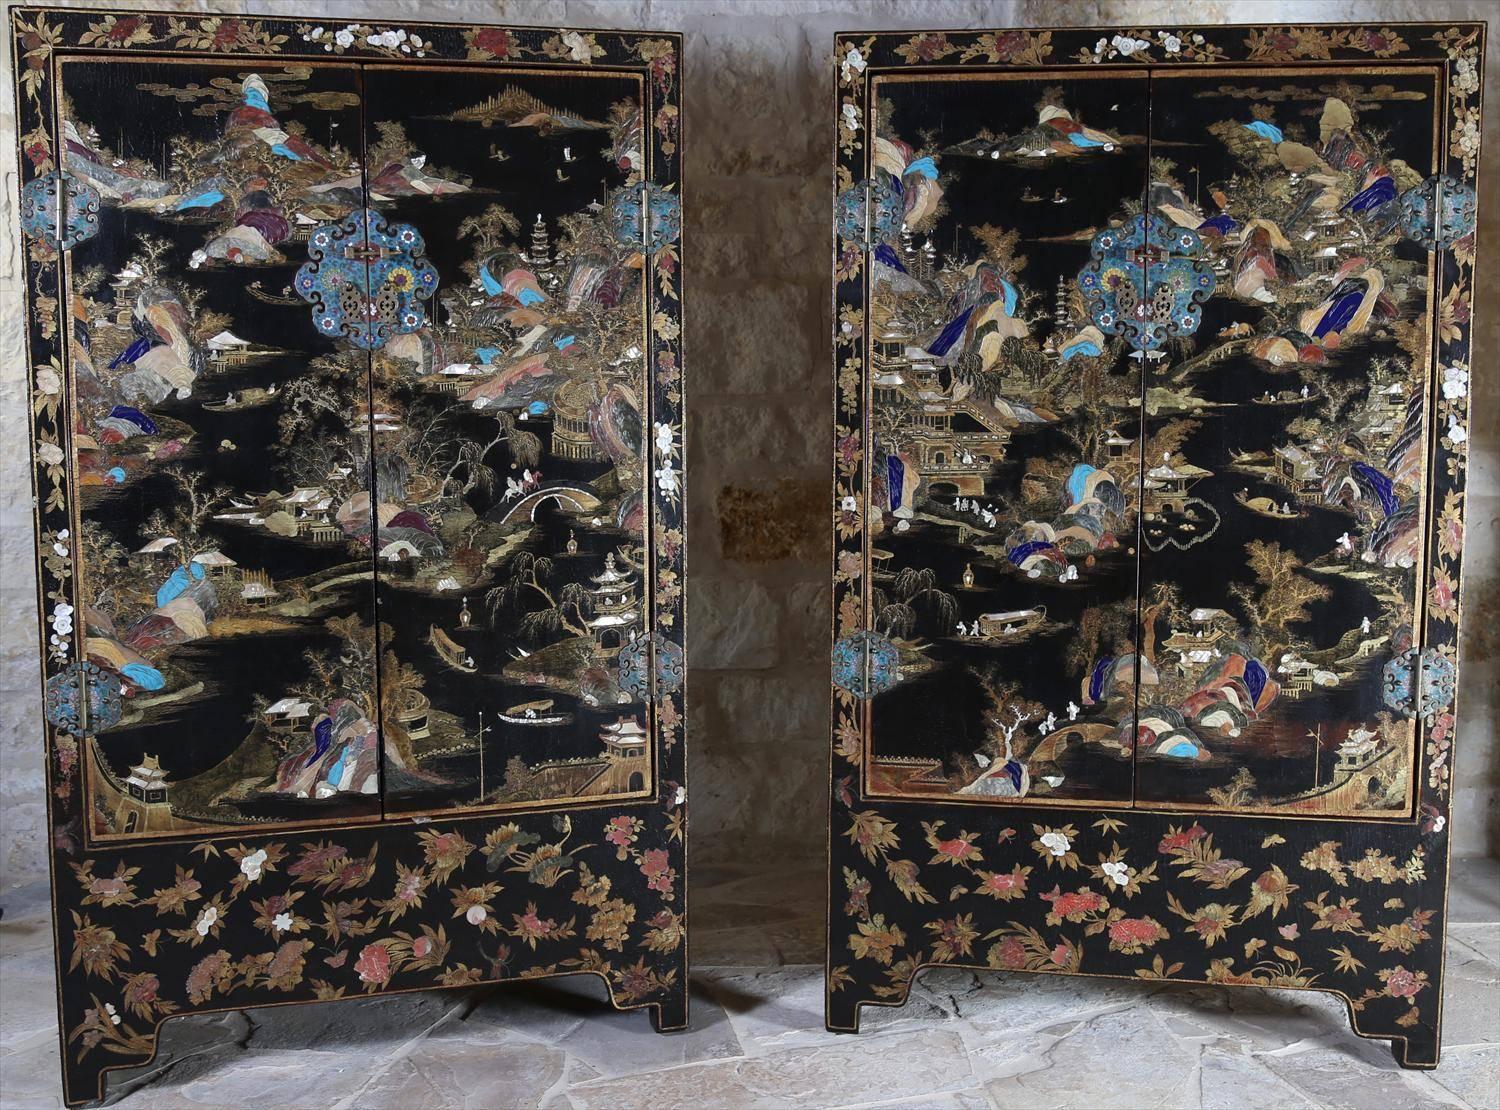 A pair of Qing dynasty early 19th century Chinese lacquer and hardstone inlaid cabinets, circa 1820, Jiaqing or Daoguang period.
This stunning pair of cabinets features a large black lacquer and gilt painted landscape scene, continuing across all